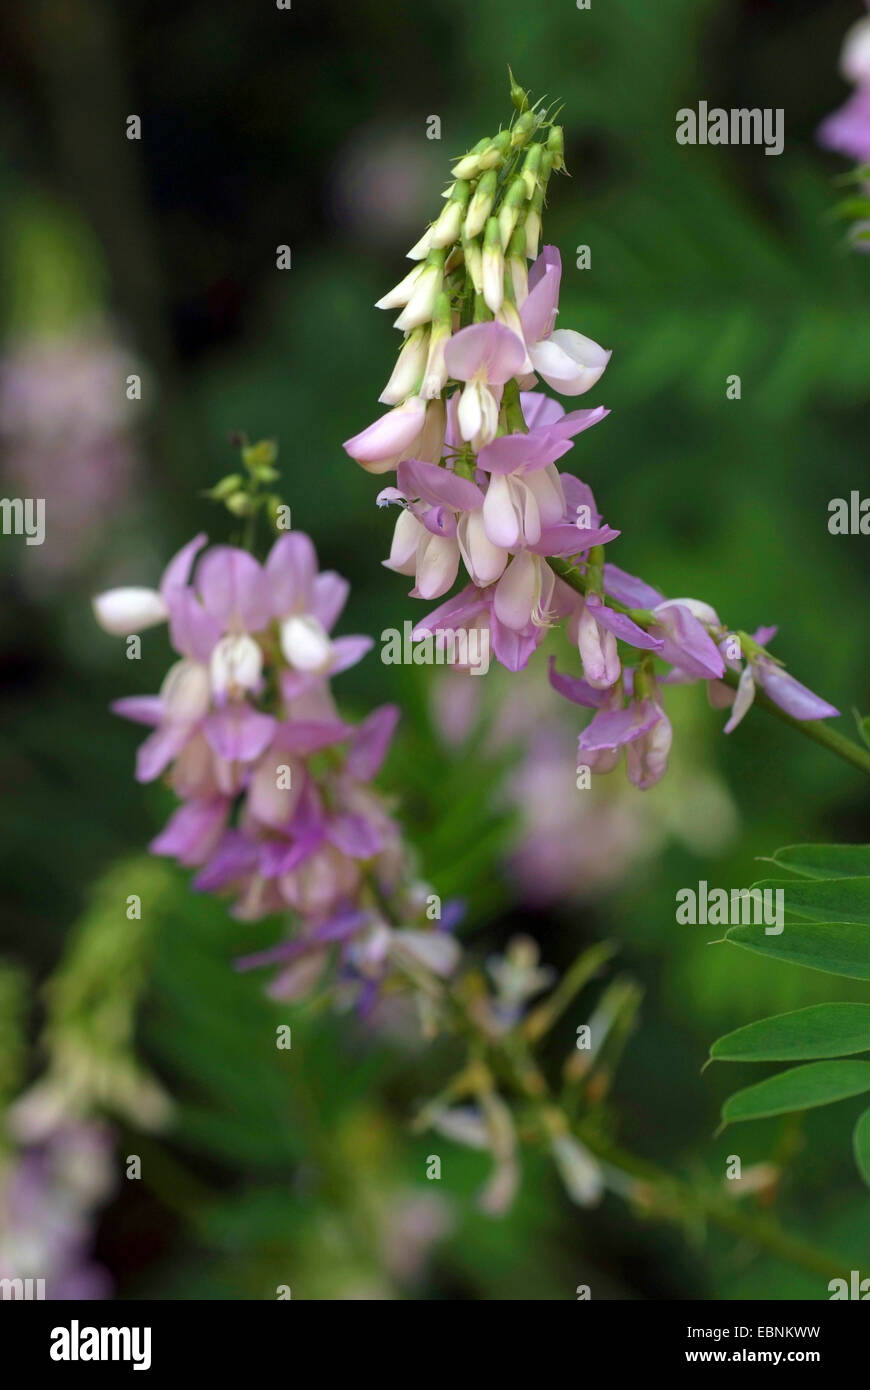 Goat's rue, French lilac, Italian fitch, Professor-weed (Galega officinalis), blooming, Germany, BGDA Stock Photo